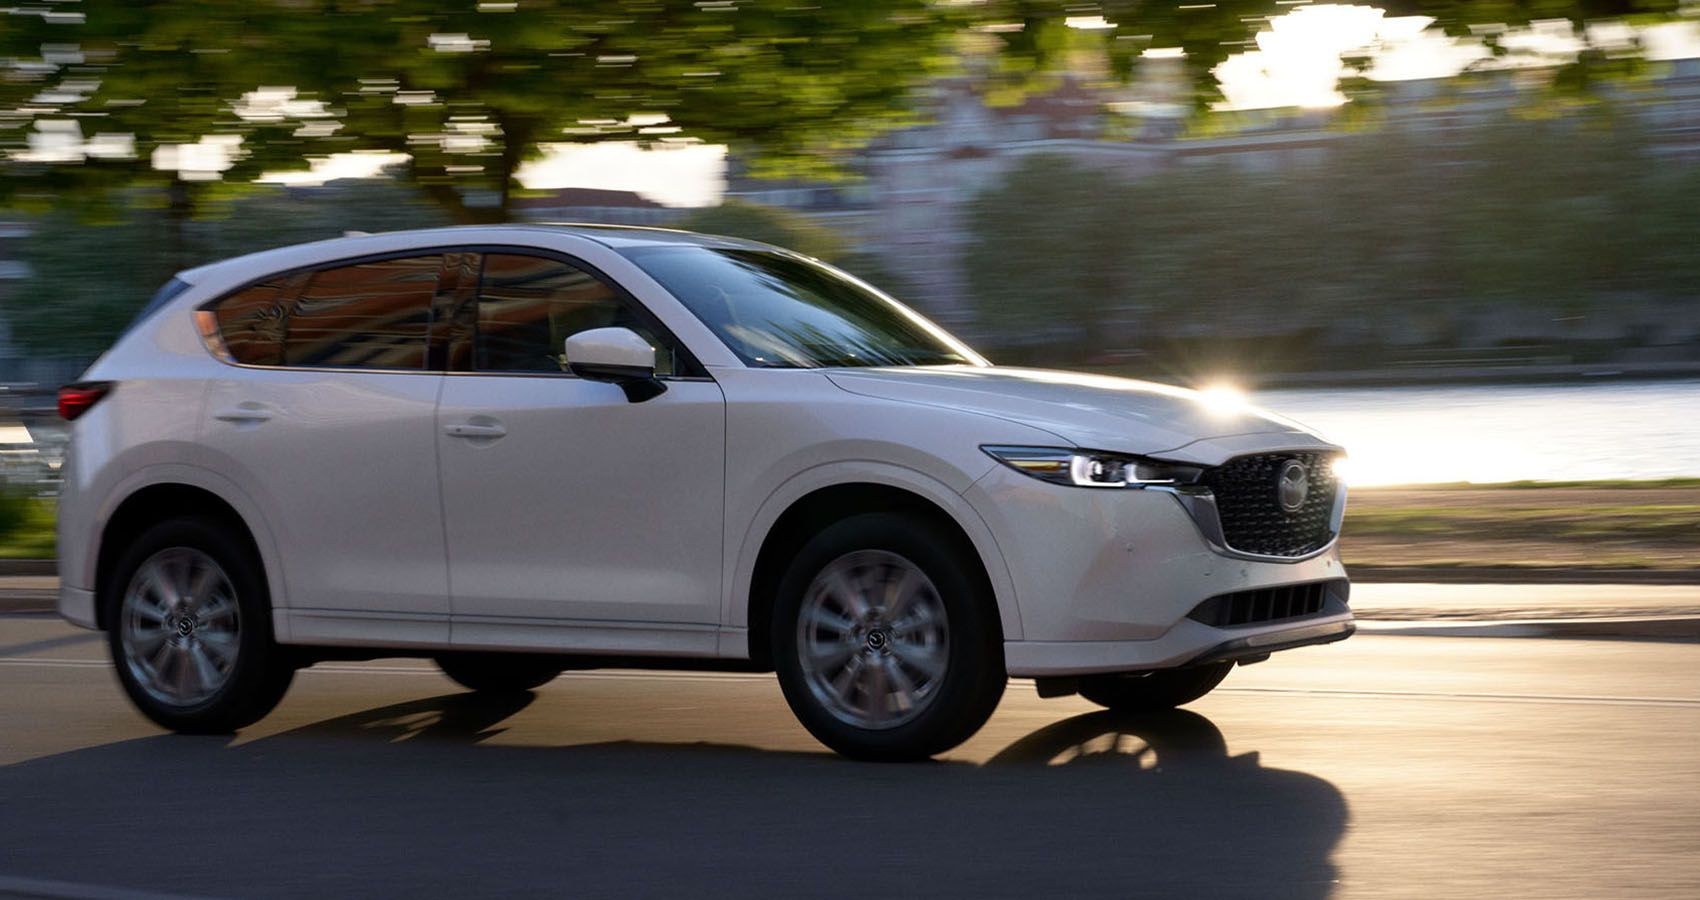 2022 Mazda CX-5: Prices, Information, And Figures